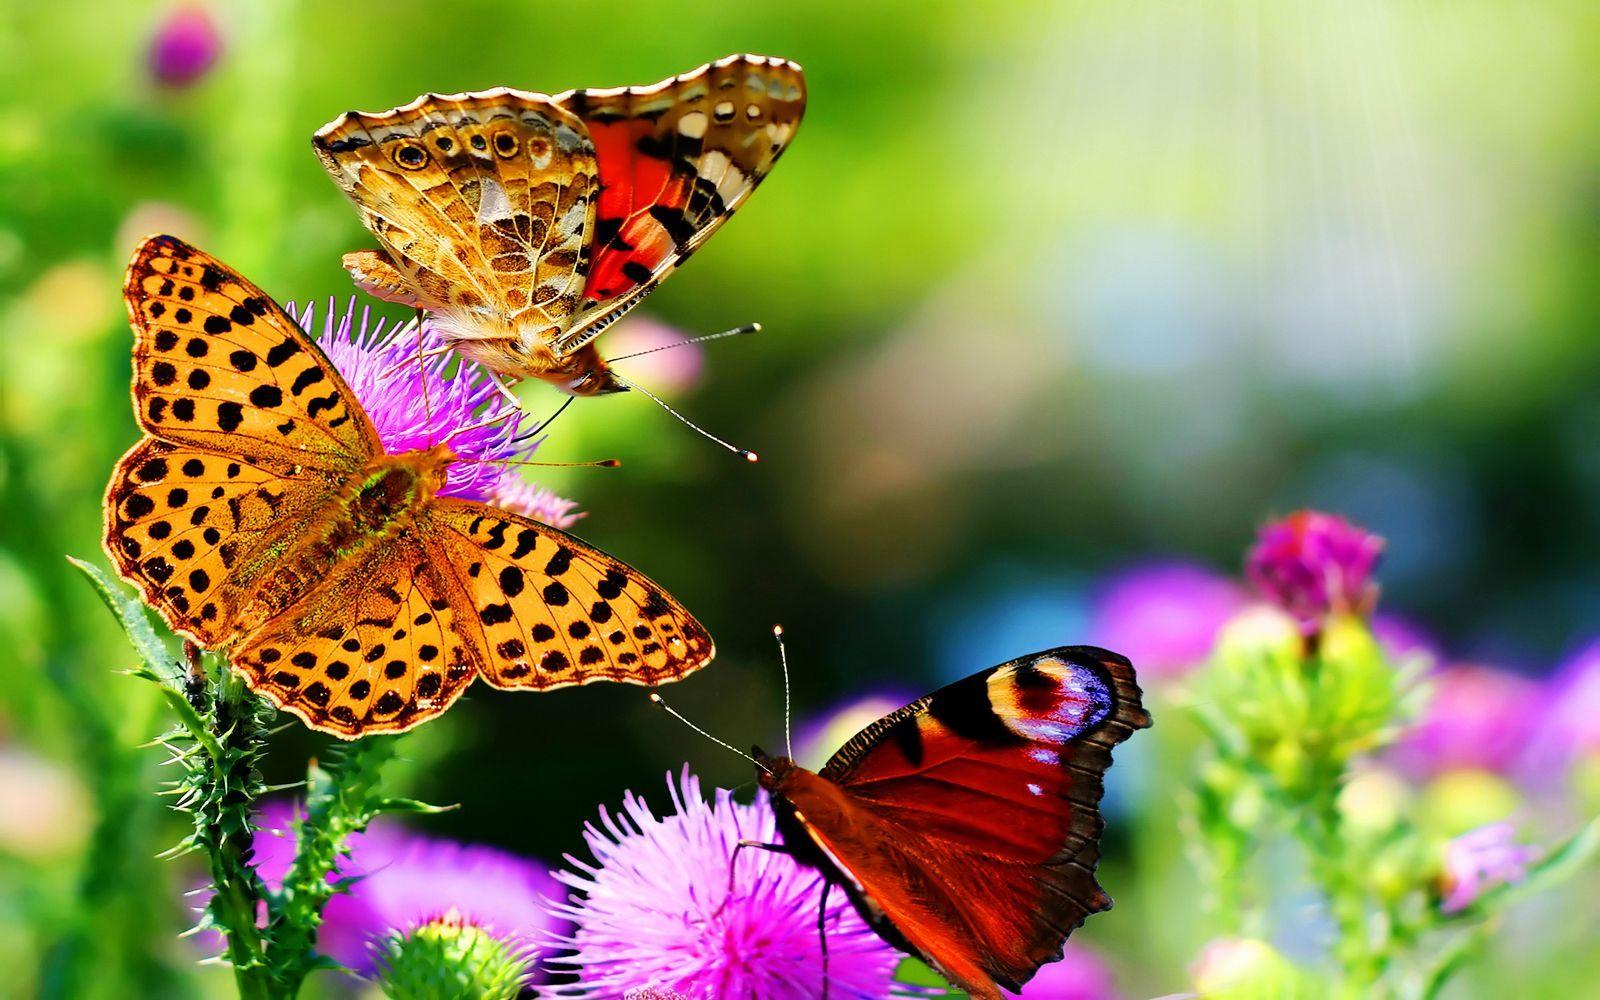 BUTTERFLY WALLPAPER. Colors of Nature HD Butterfly Wallpaper. HD